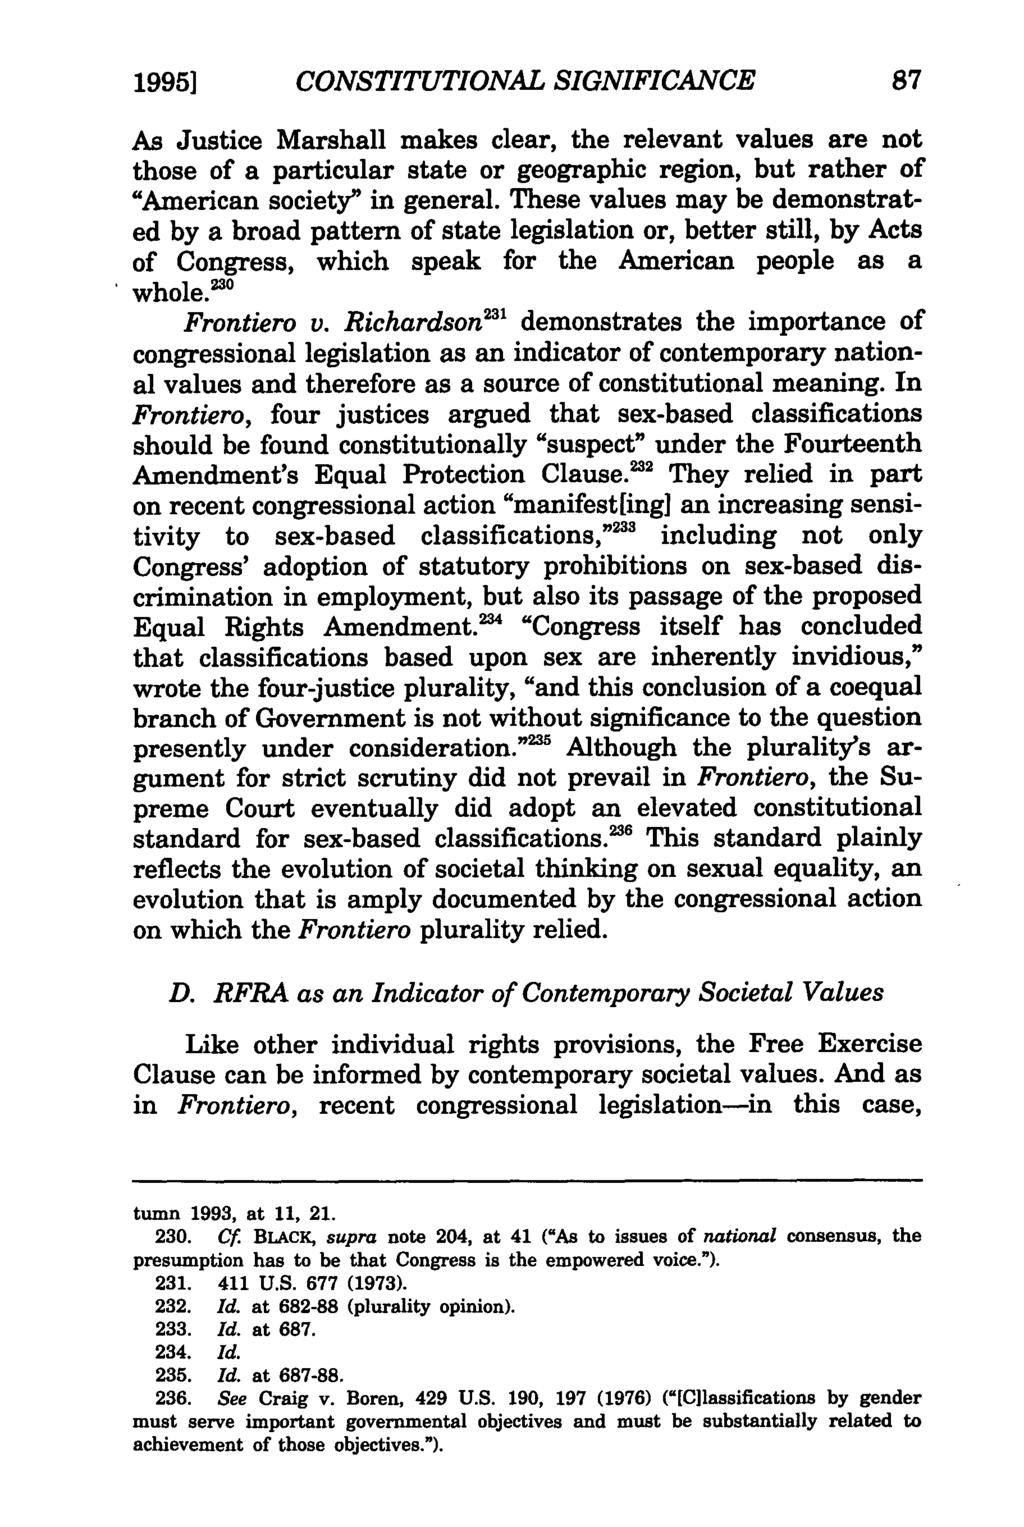 1995] Conkle: The Religious Freedom Restoration Act CONSTITUTIONAL SIGNIFICANCE As Justice Marshall makes clear, the relevant values are not those of a particular state or geographic region, but